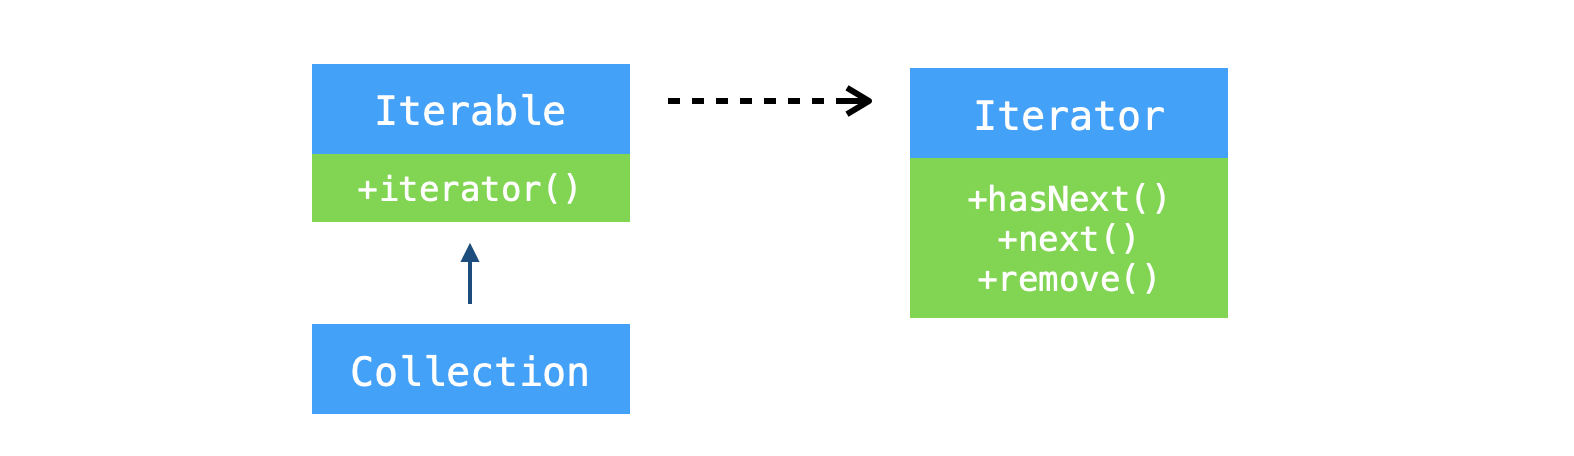 Collection, Iterable, Iterator 과 관계